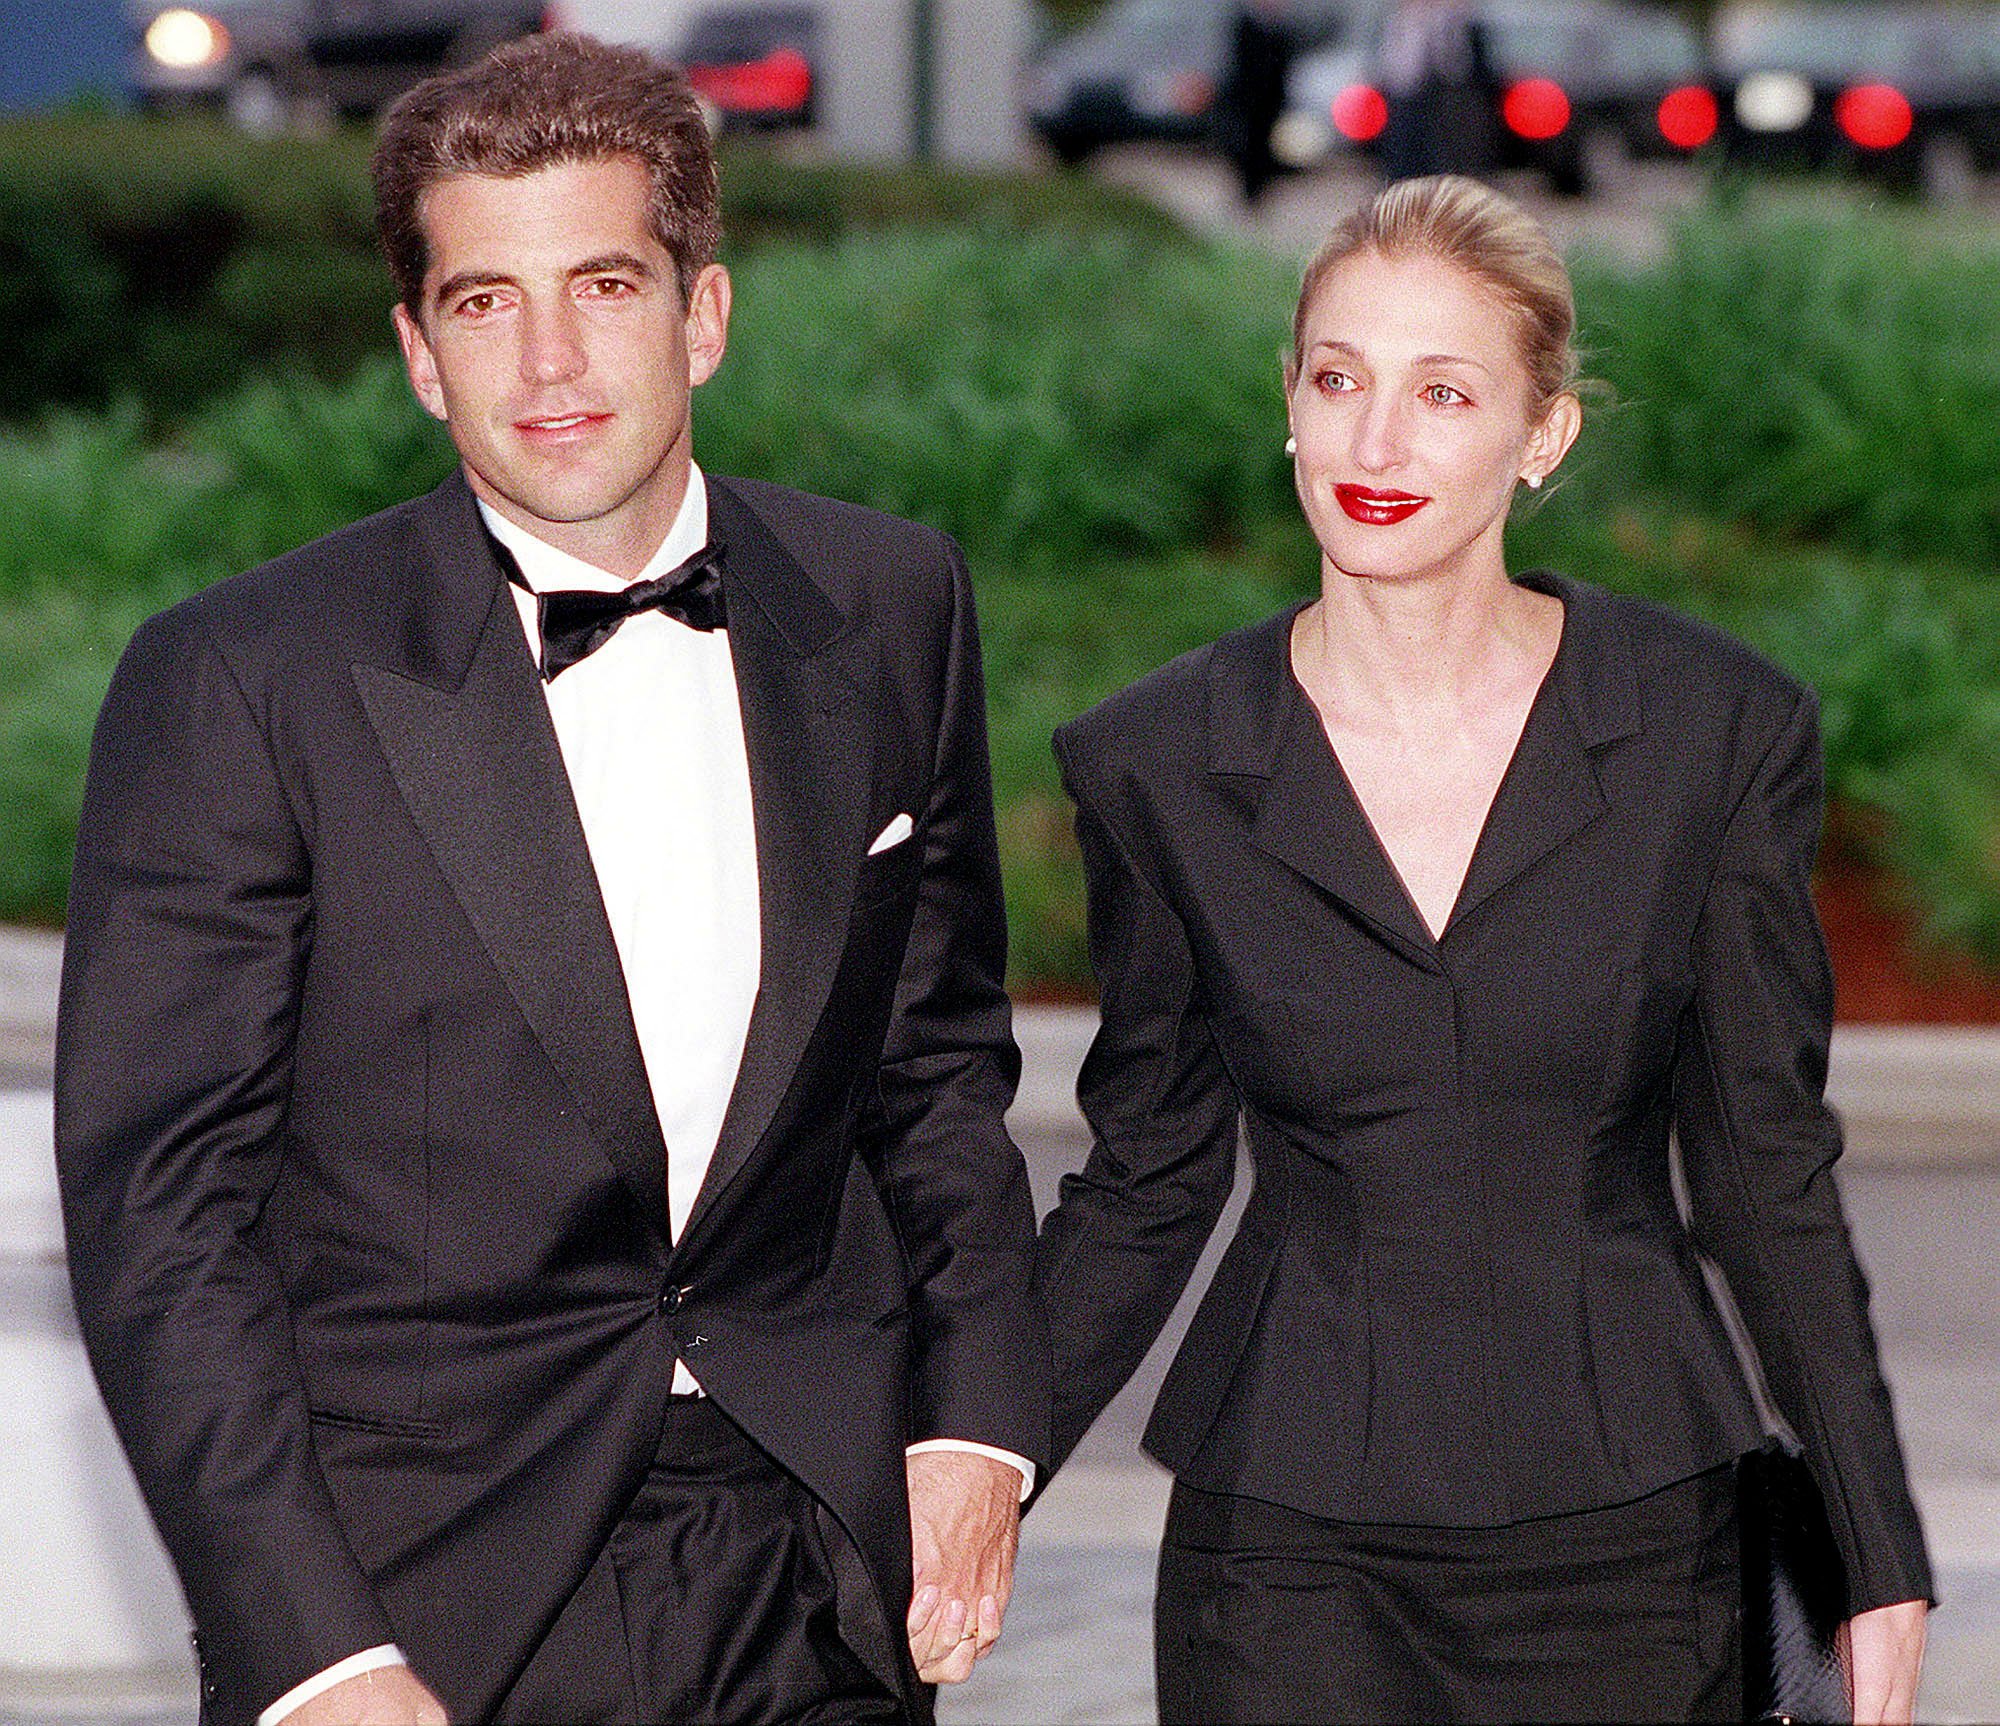 John F. Kennedy, Jr. and Carolyn Bessette Kennedy arriving at the annual John F. Kennedy Library Foundation dinner and Profiles in Courage awards at the Kennedy Library on May 23, 1999 in Boston, Massachusetts. / Source: Getty Images